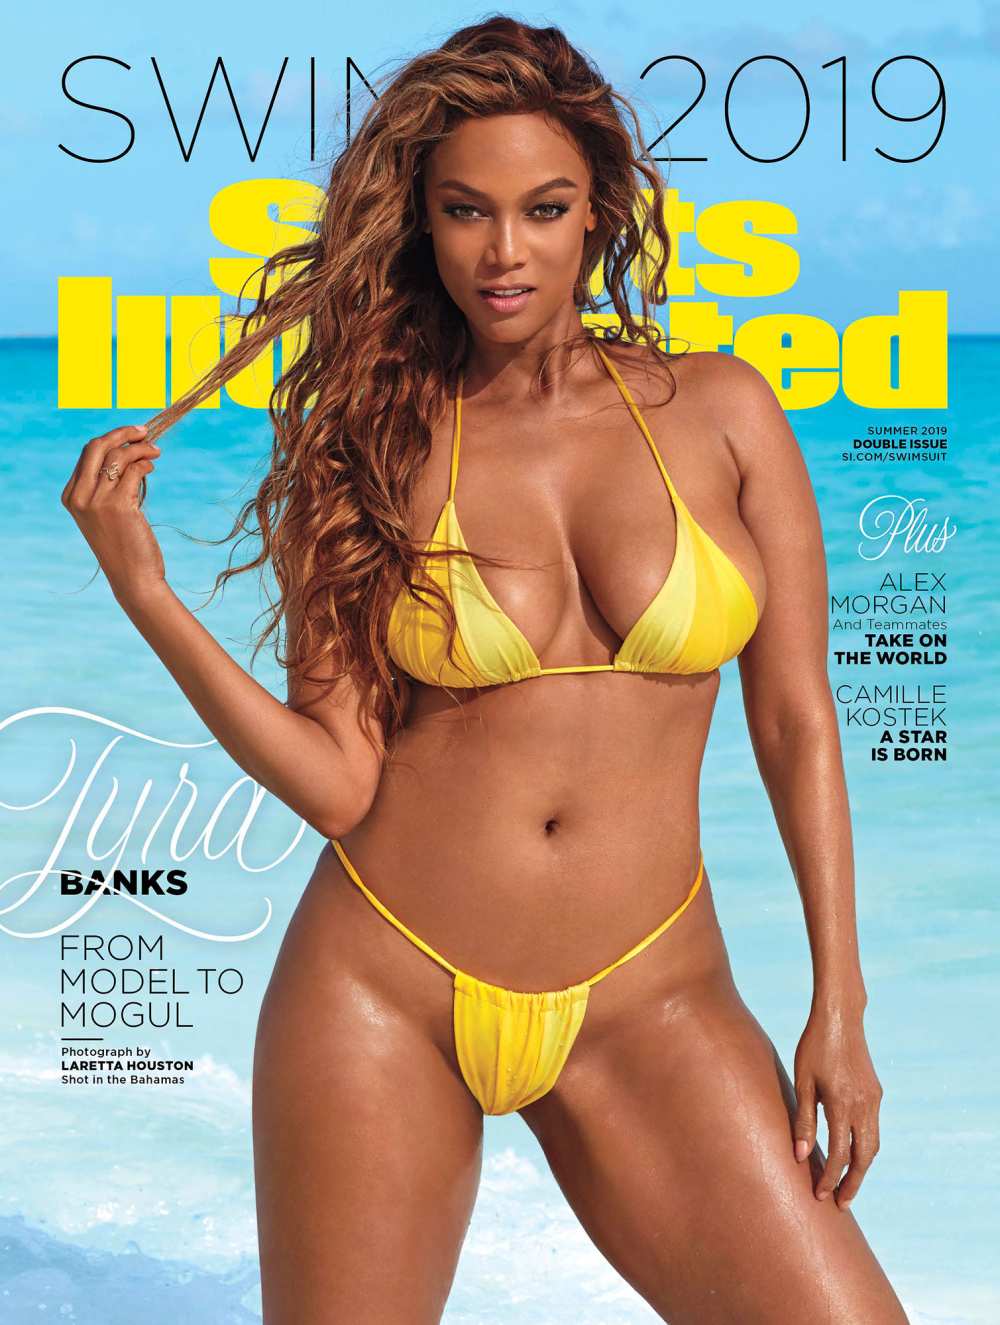 Tyra Banks Reveals Shes Gained 30 Pounds Since 2019 Sports Illustrated Swimsuit Cover